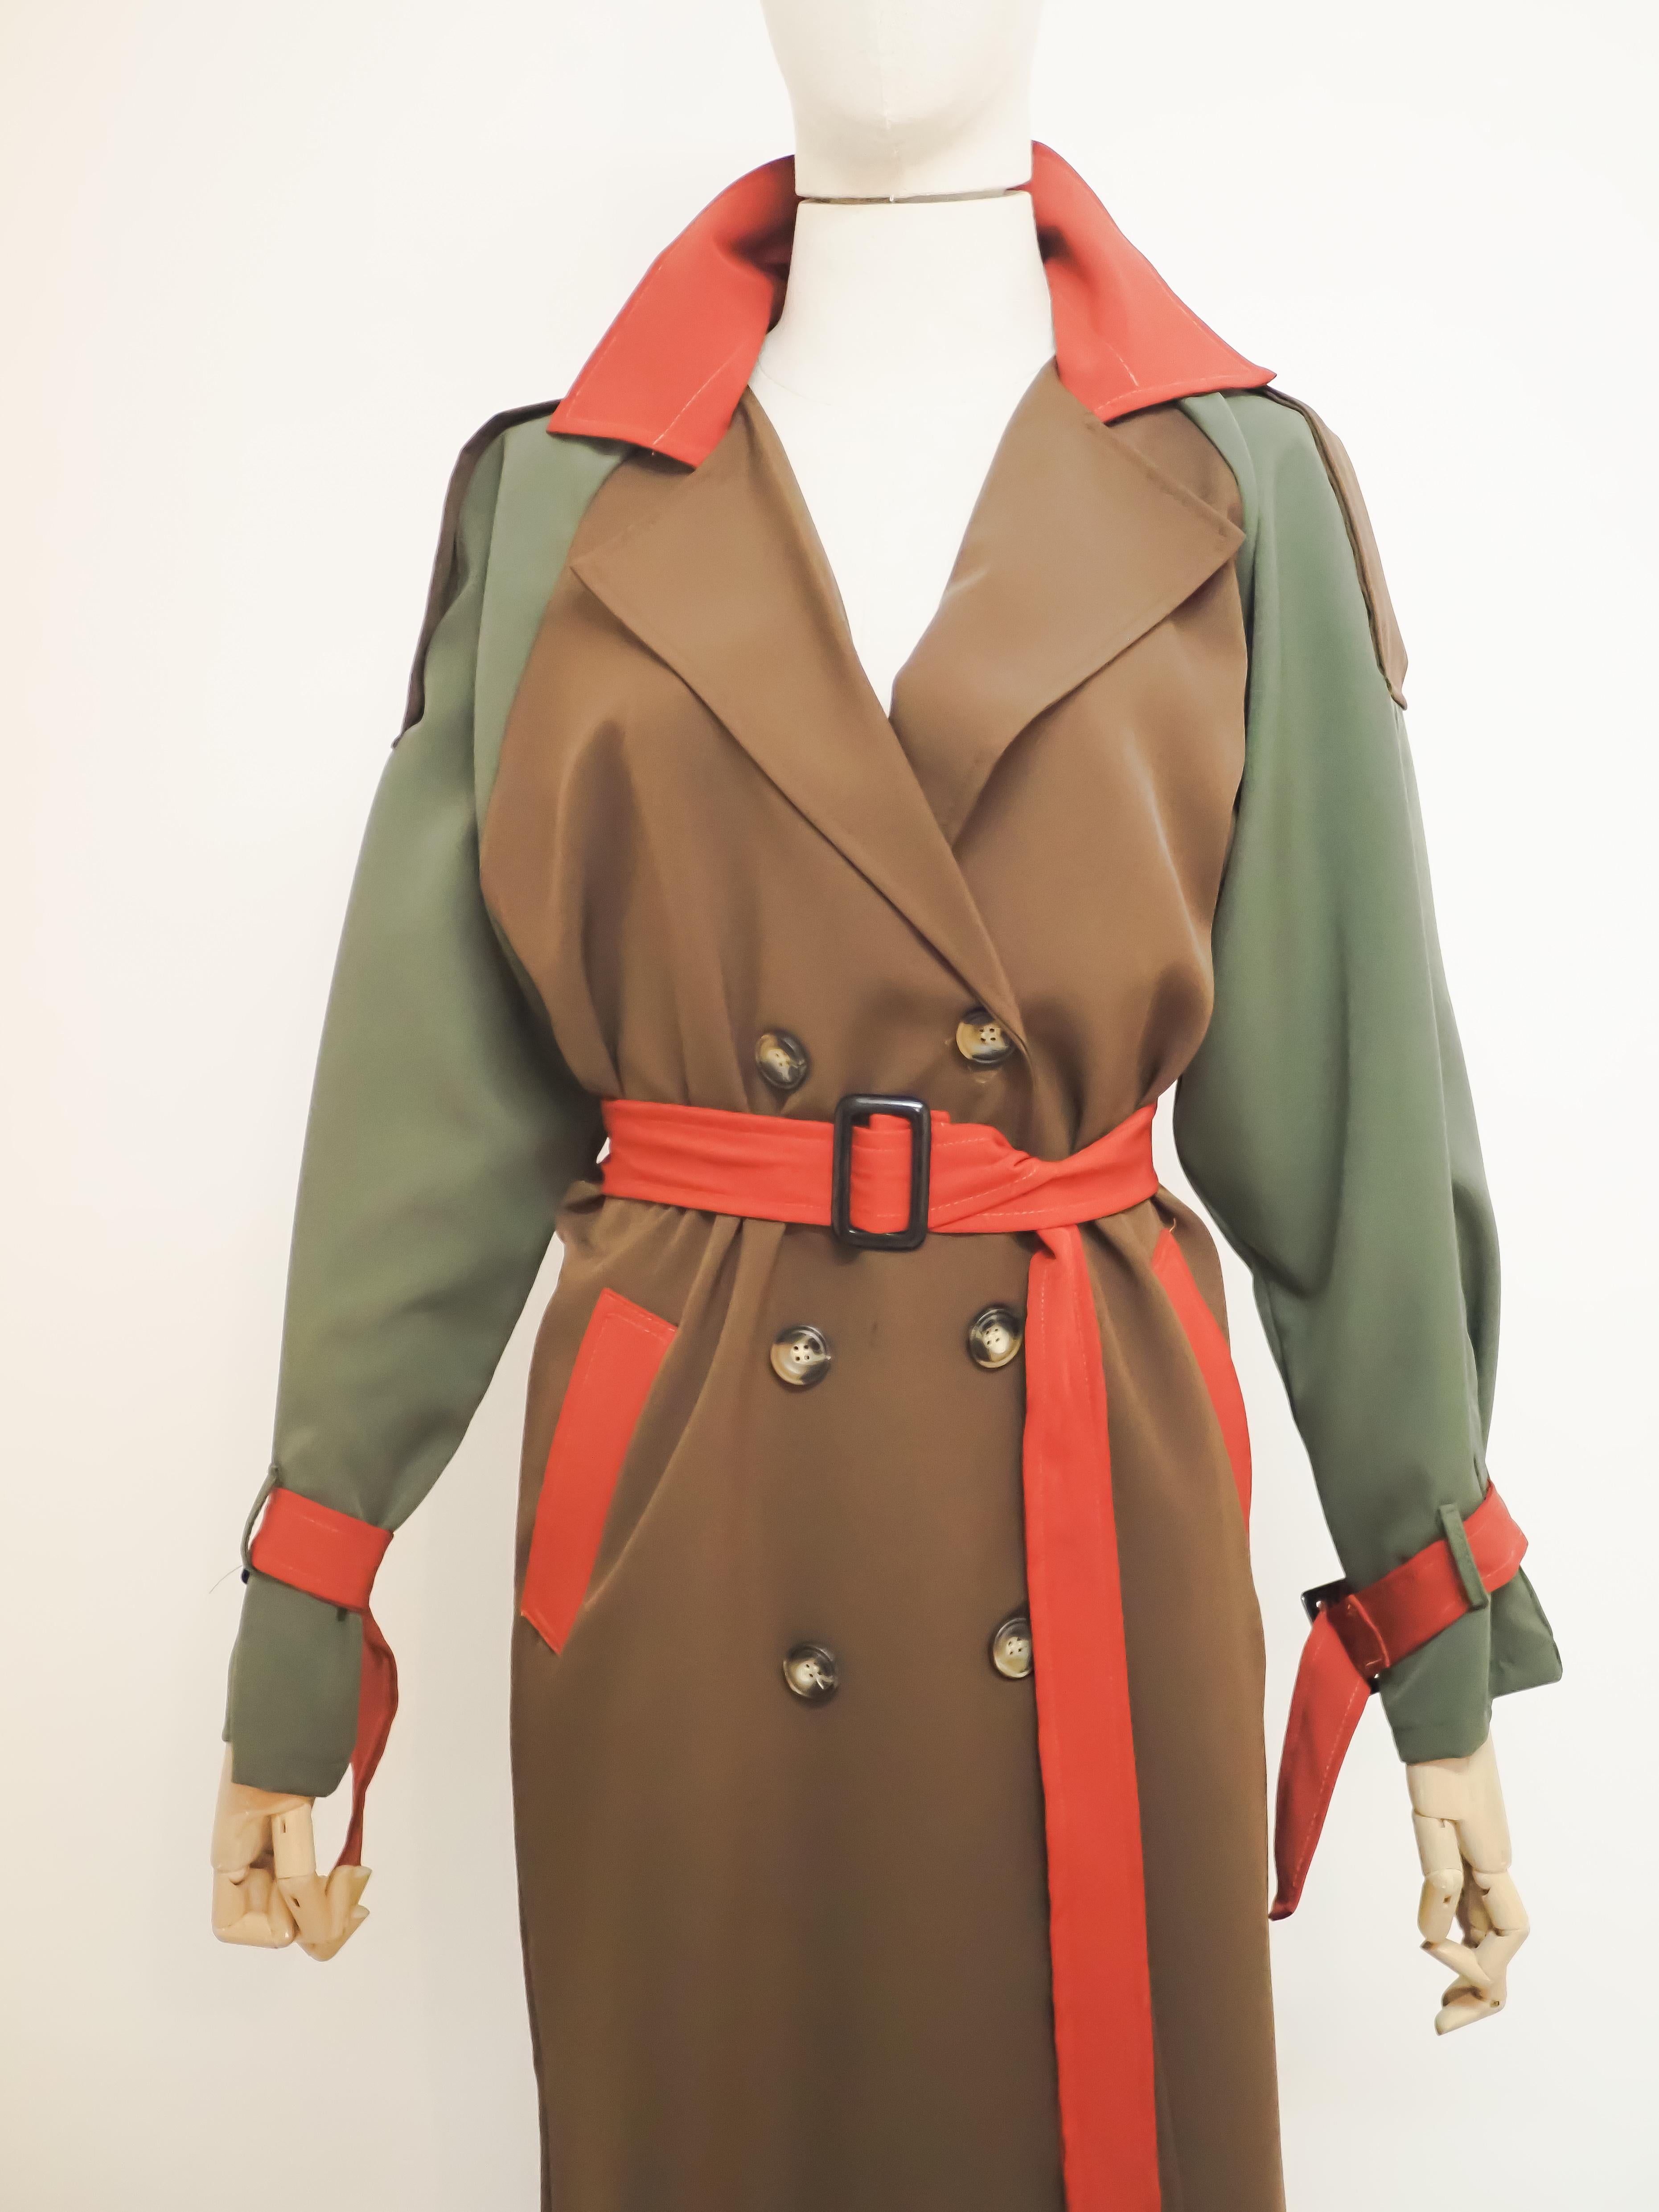 Multicoloured vintage trench-coat

Green, brown adn red multicoloured trench never been used in one size
belt is sizeable